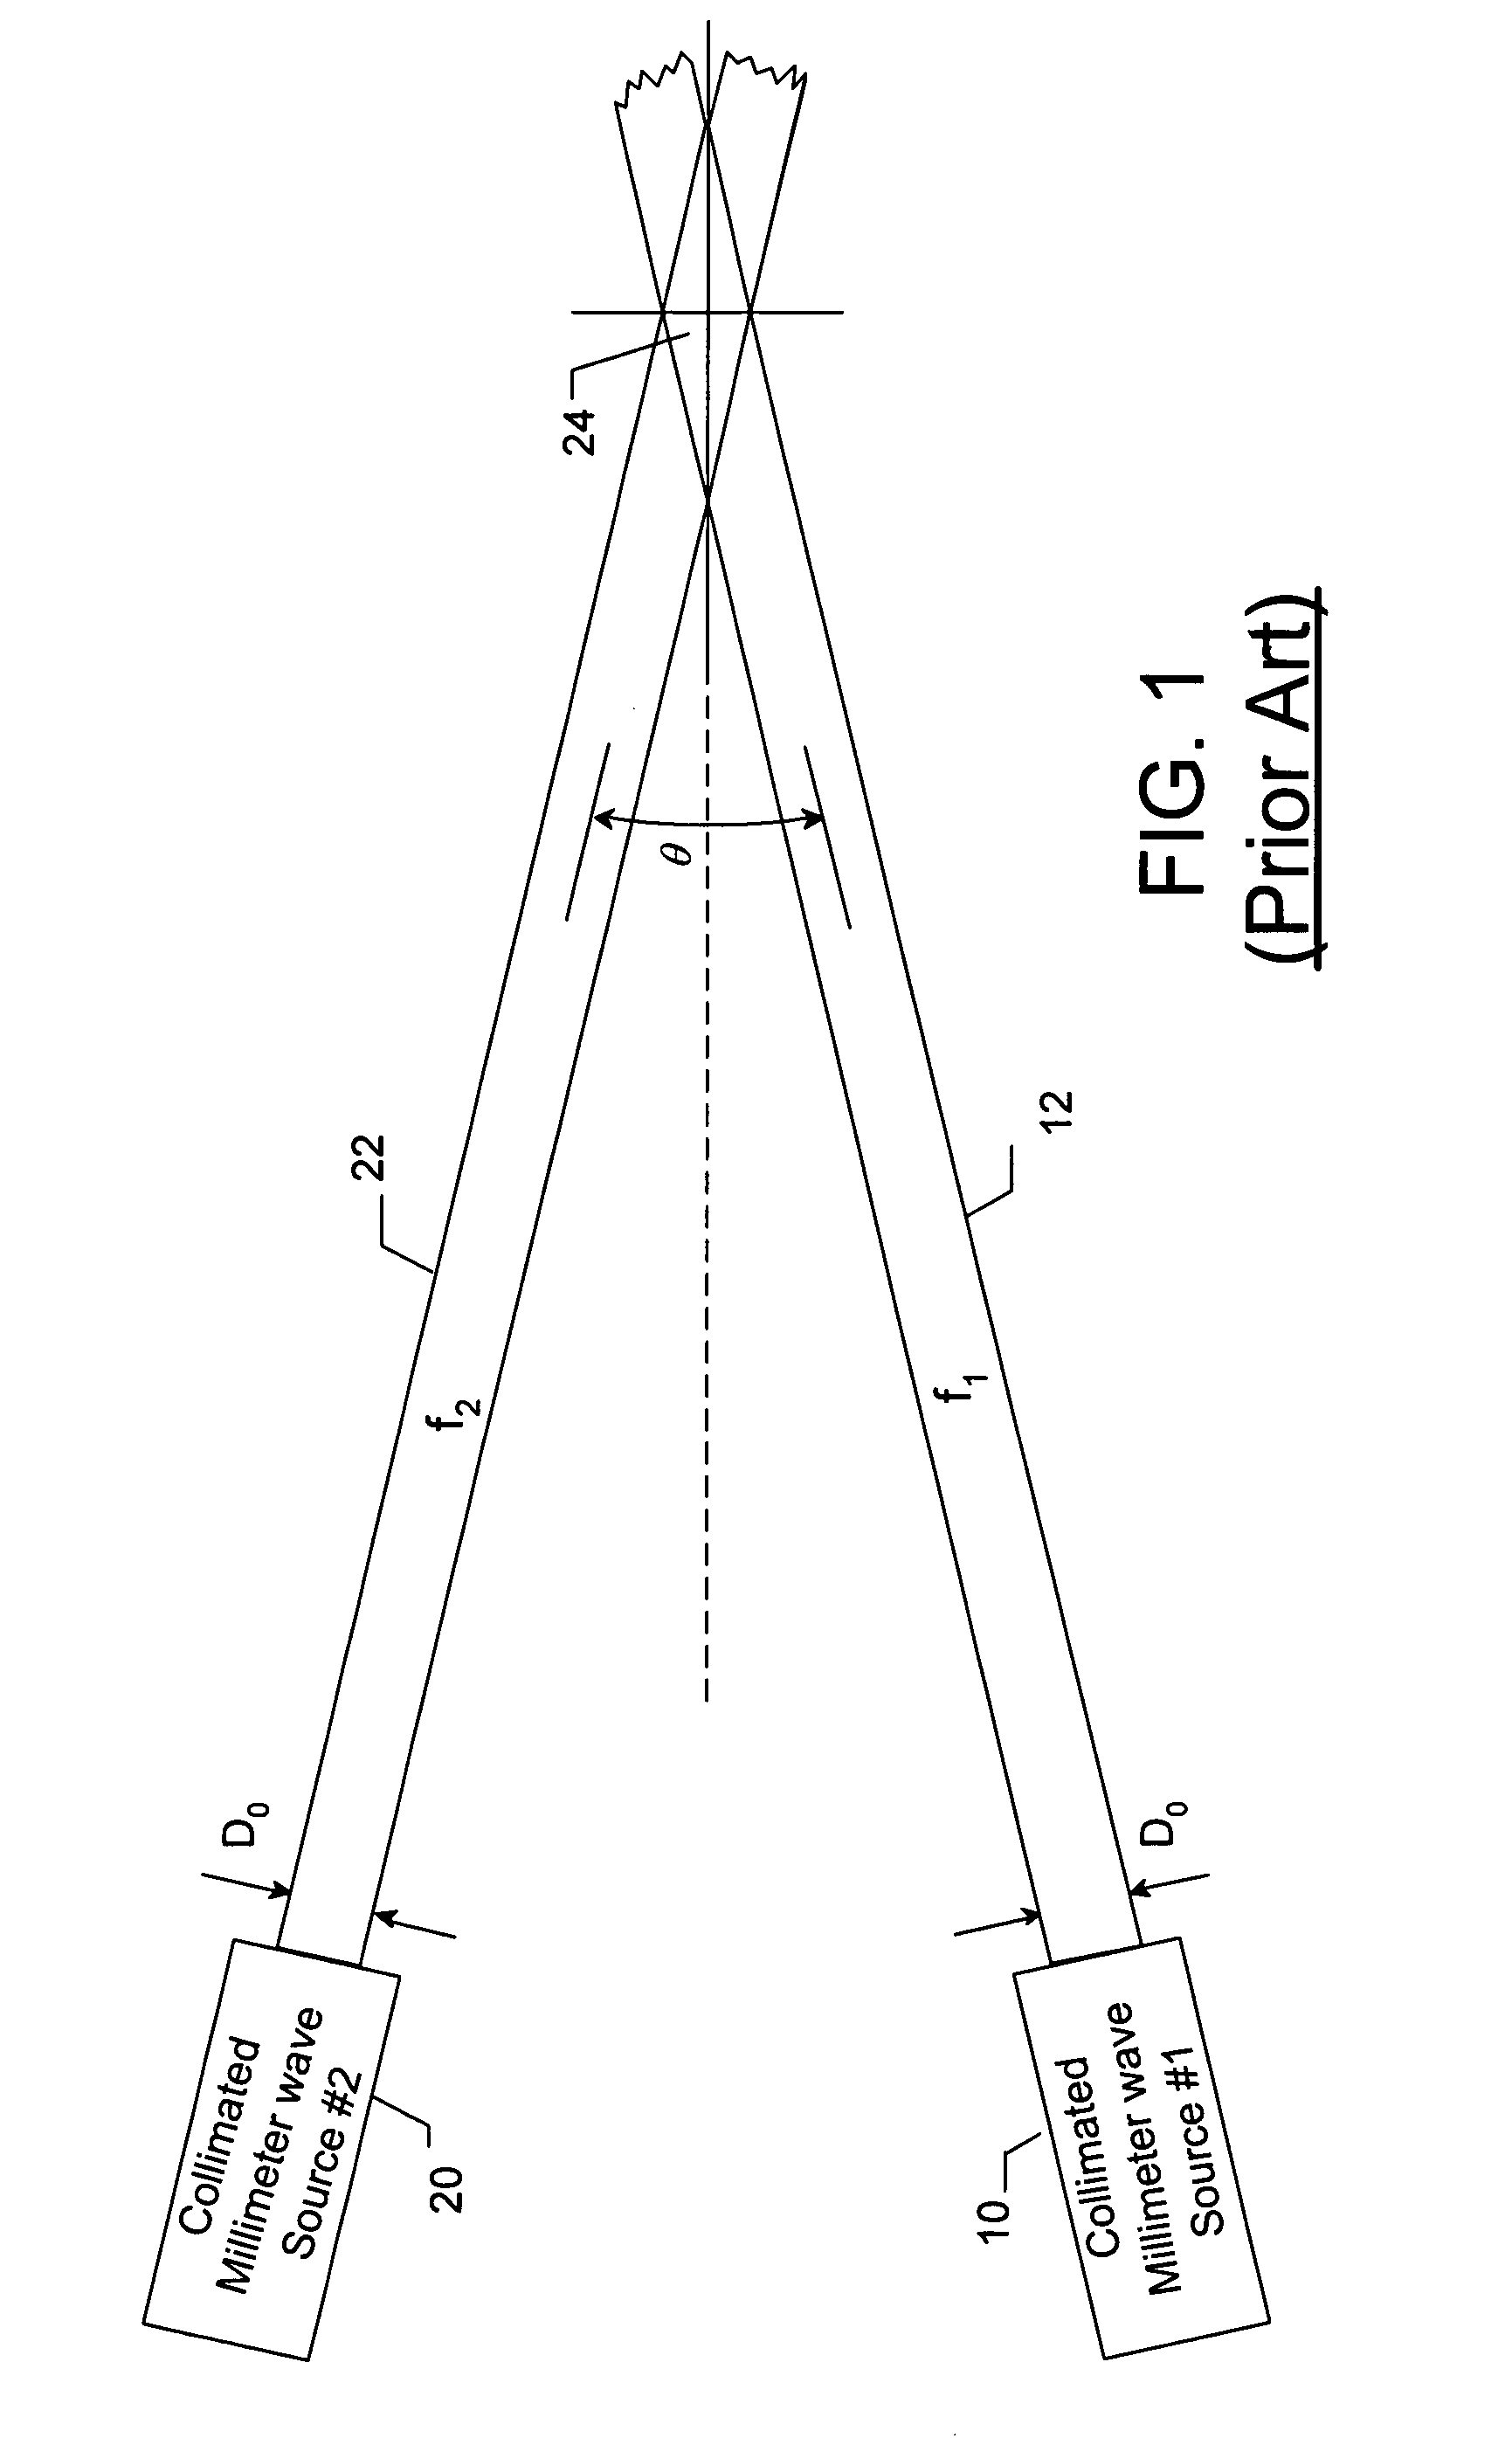 High-frequency two-dimensional antenna and associated down-conversion method